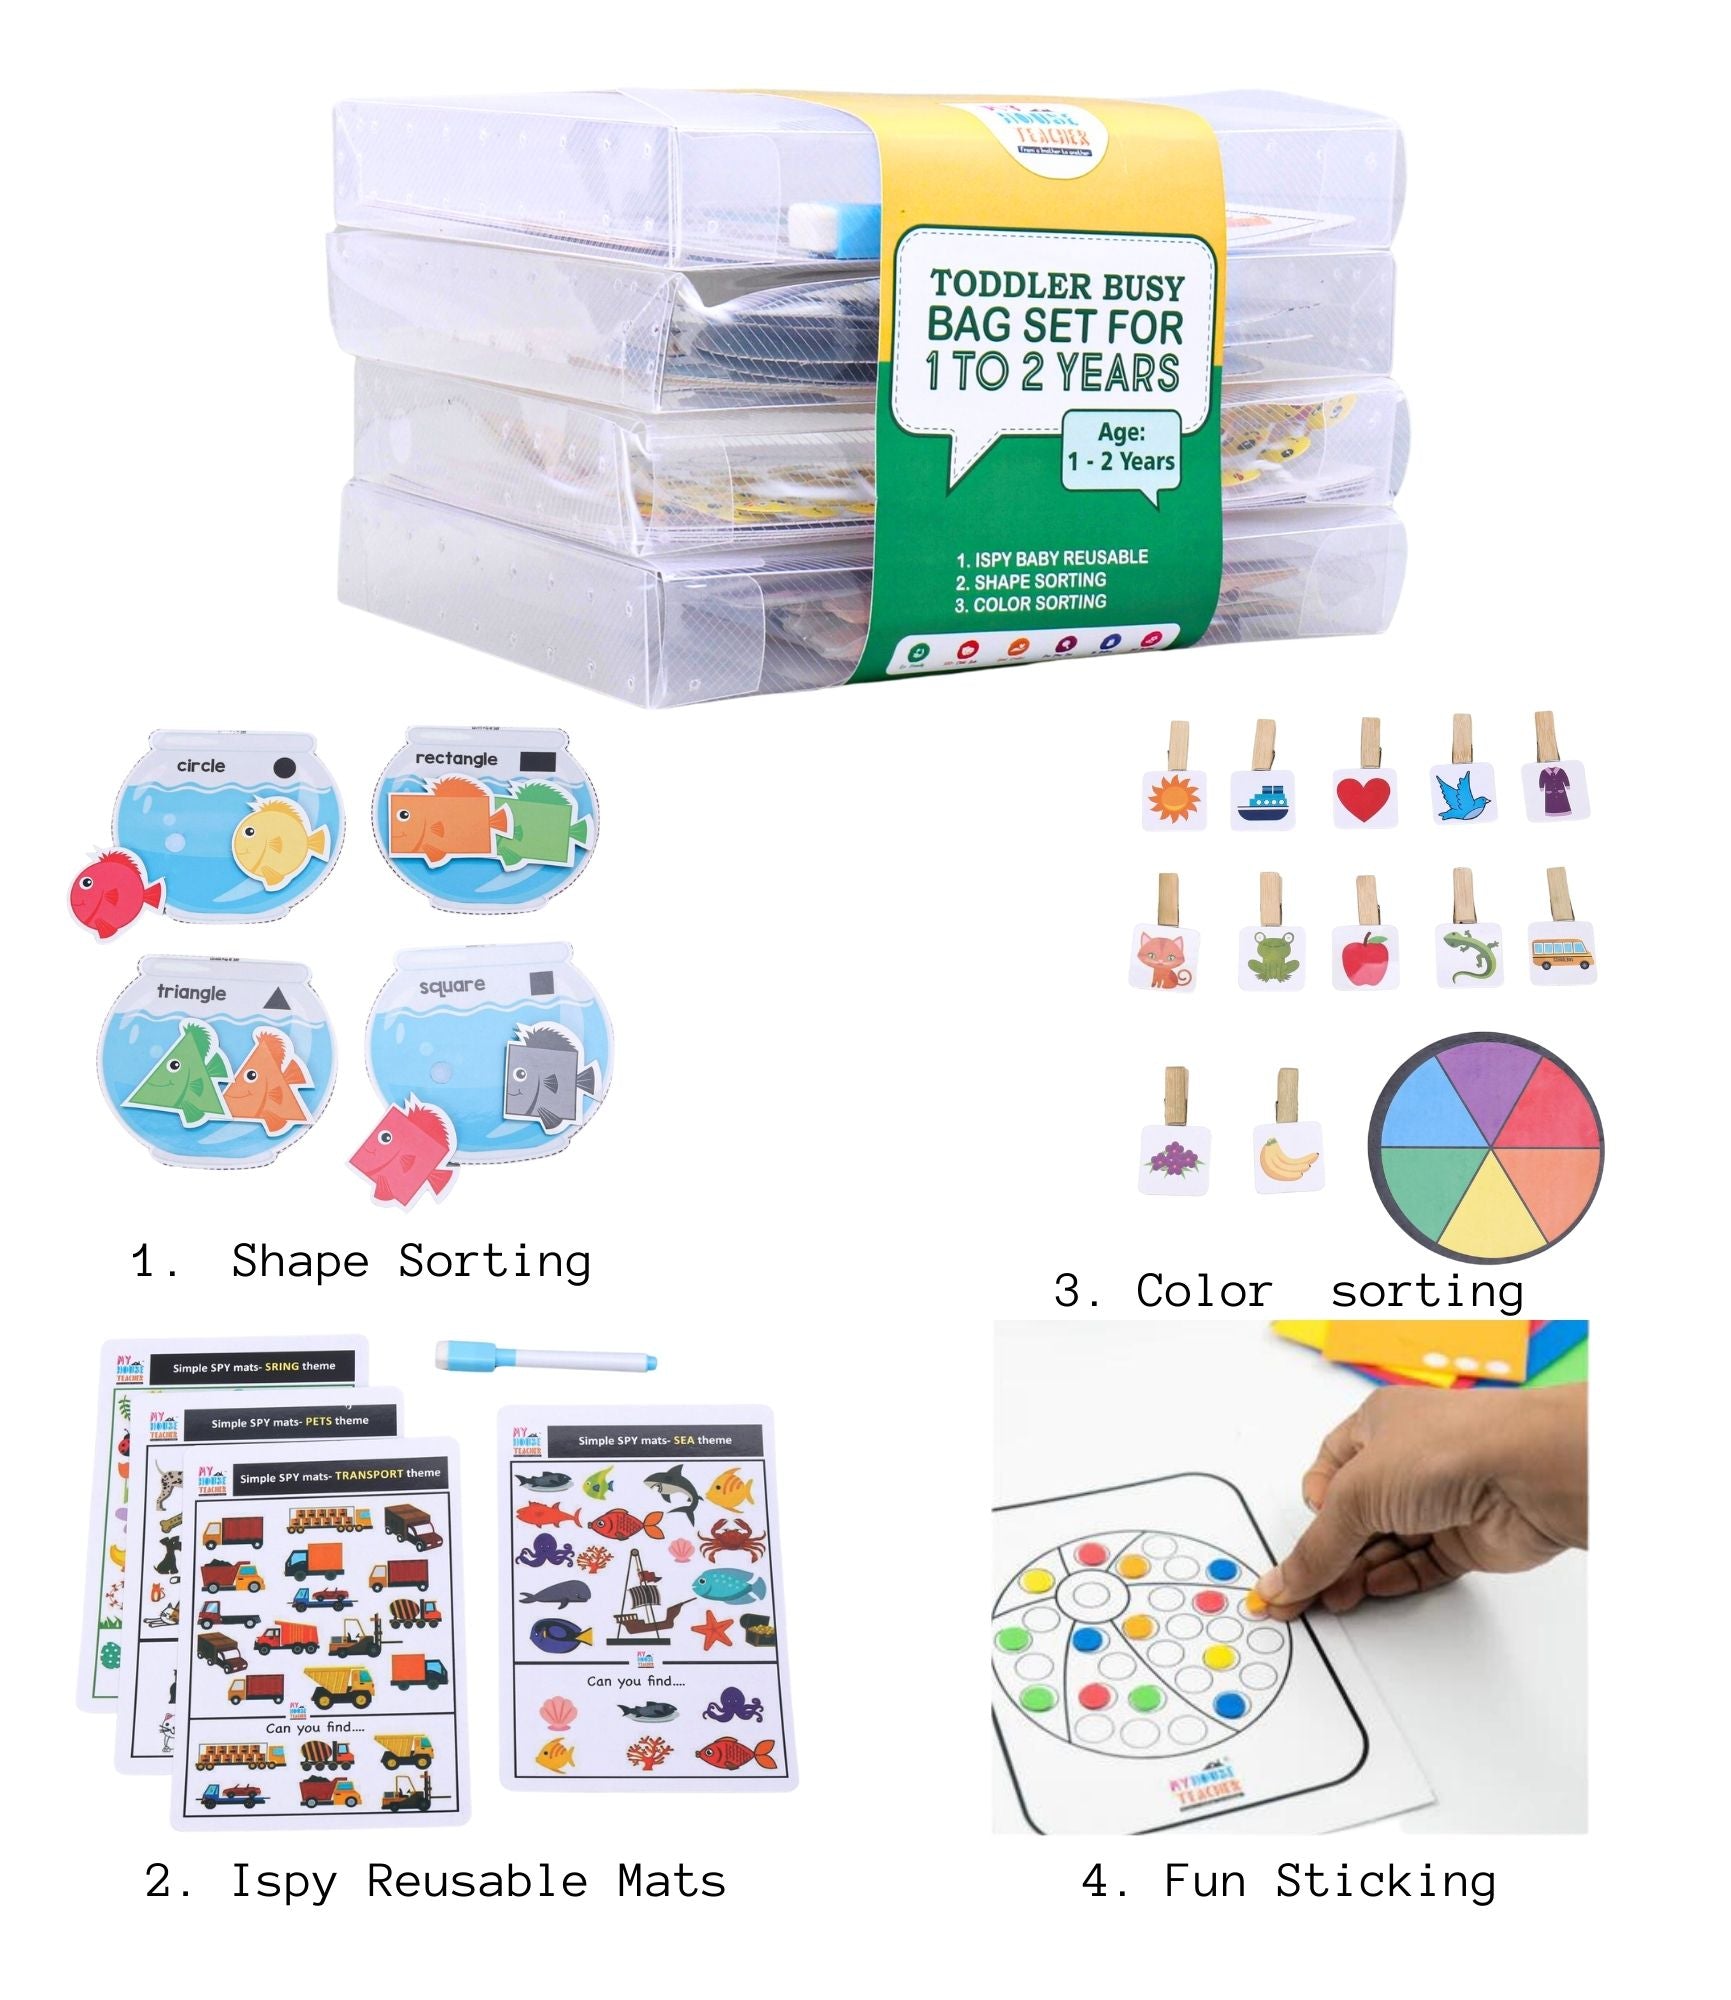 Toddler Money Saver Combo Activity Pack for 1 to 2 Years Old